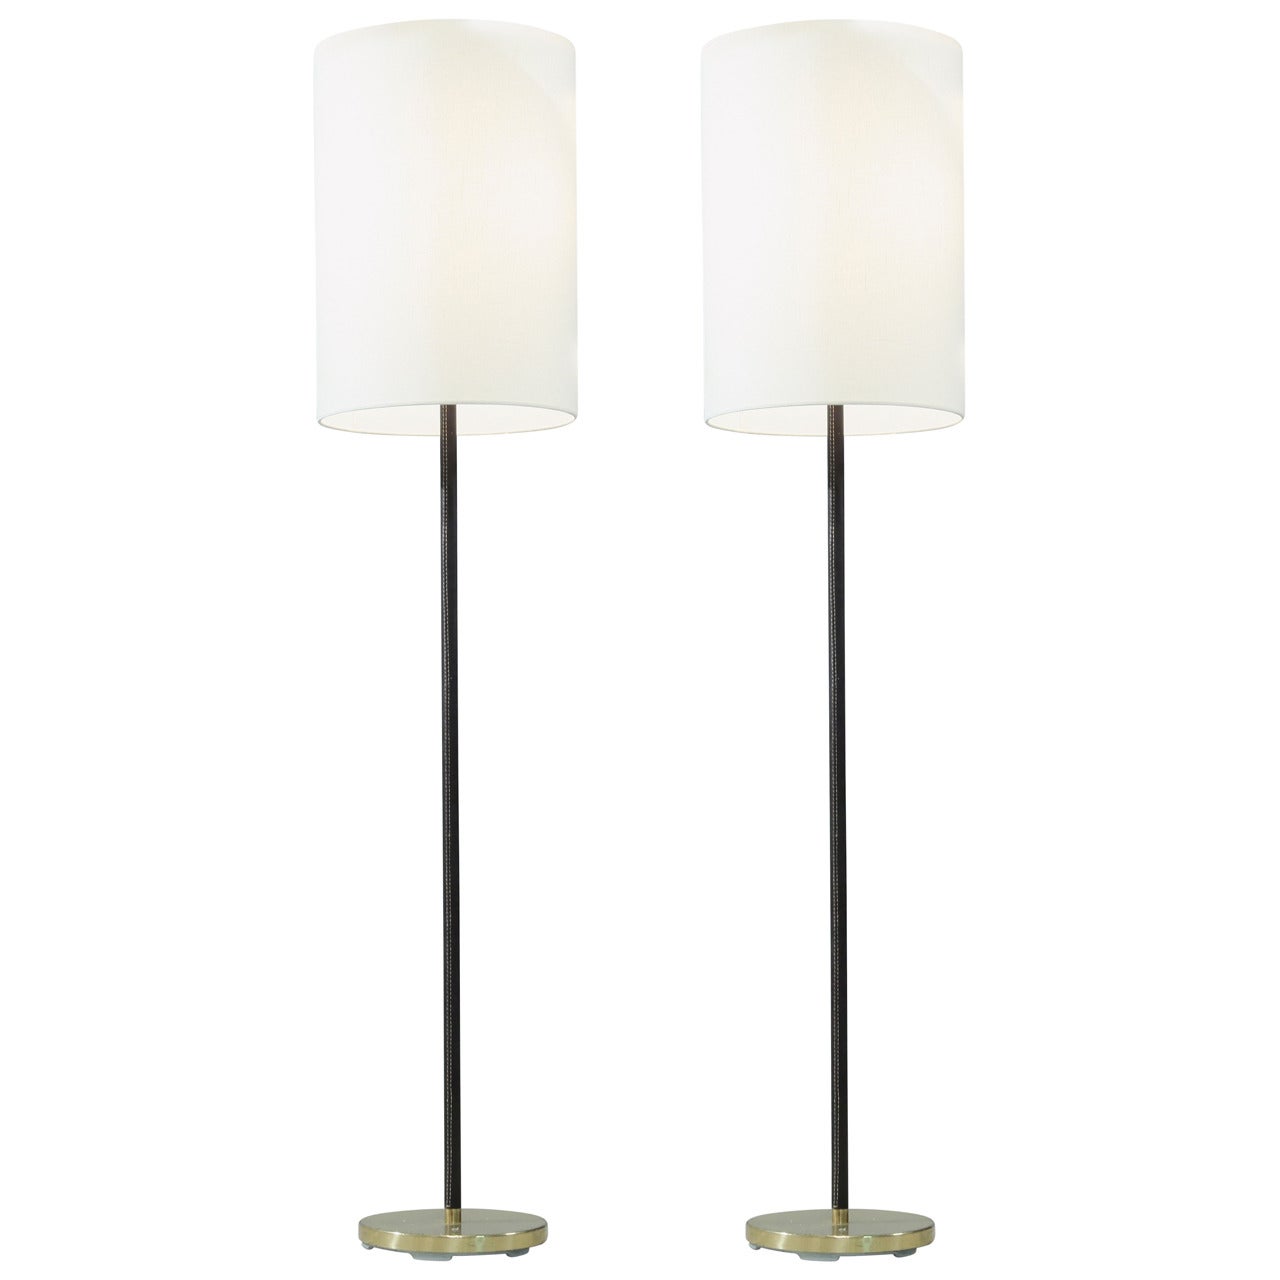 Pair of Minimal Floor Lamps with Leather Stem and Long Shade, Kalmar, Austria